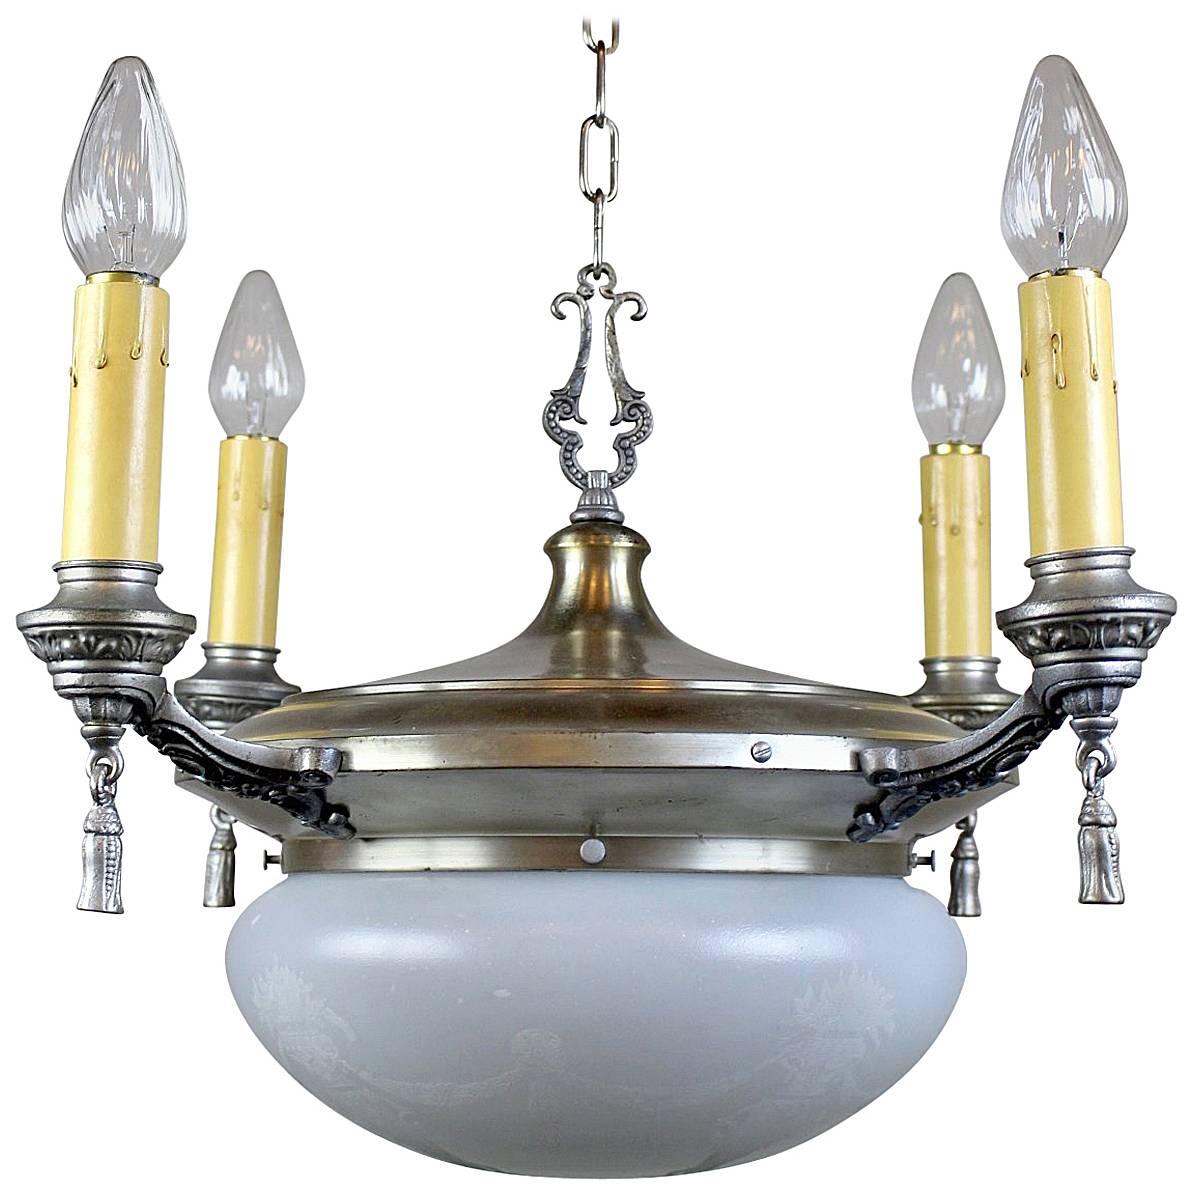 Satin Silver Plated Dining Room Fixture For Sale